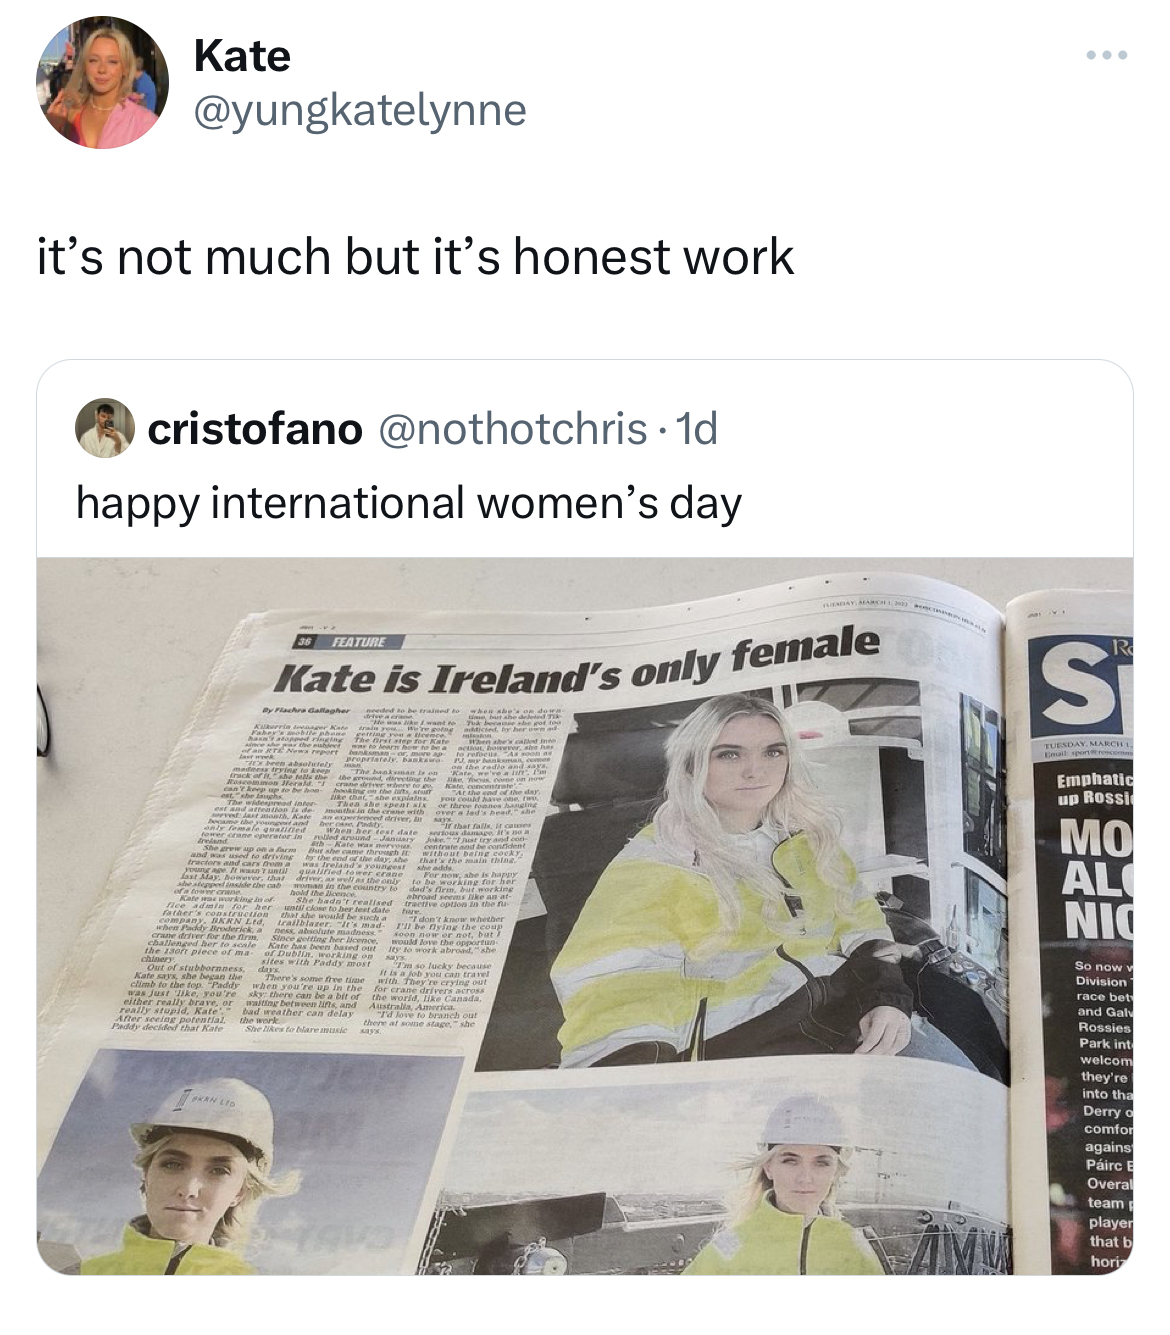 savage and funny tweets -material - Kate it's not much but it's honest work cristofano . 1d happy international women's day Kate is Ireland's only female S Emphatic un Boss Mo Al Nic o C Roues they' Berry apak Parc Own team Bat hon